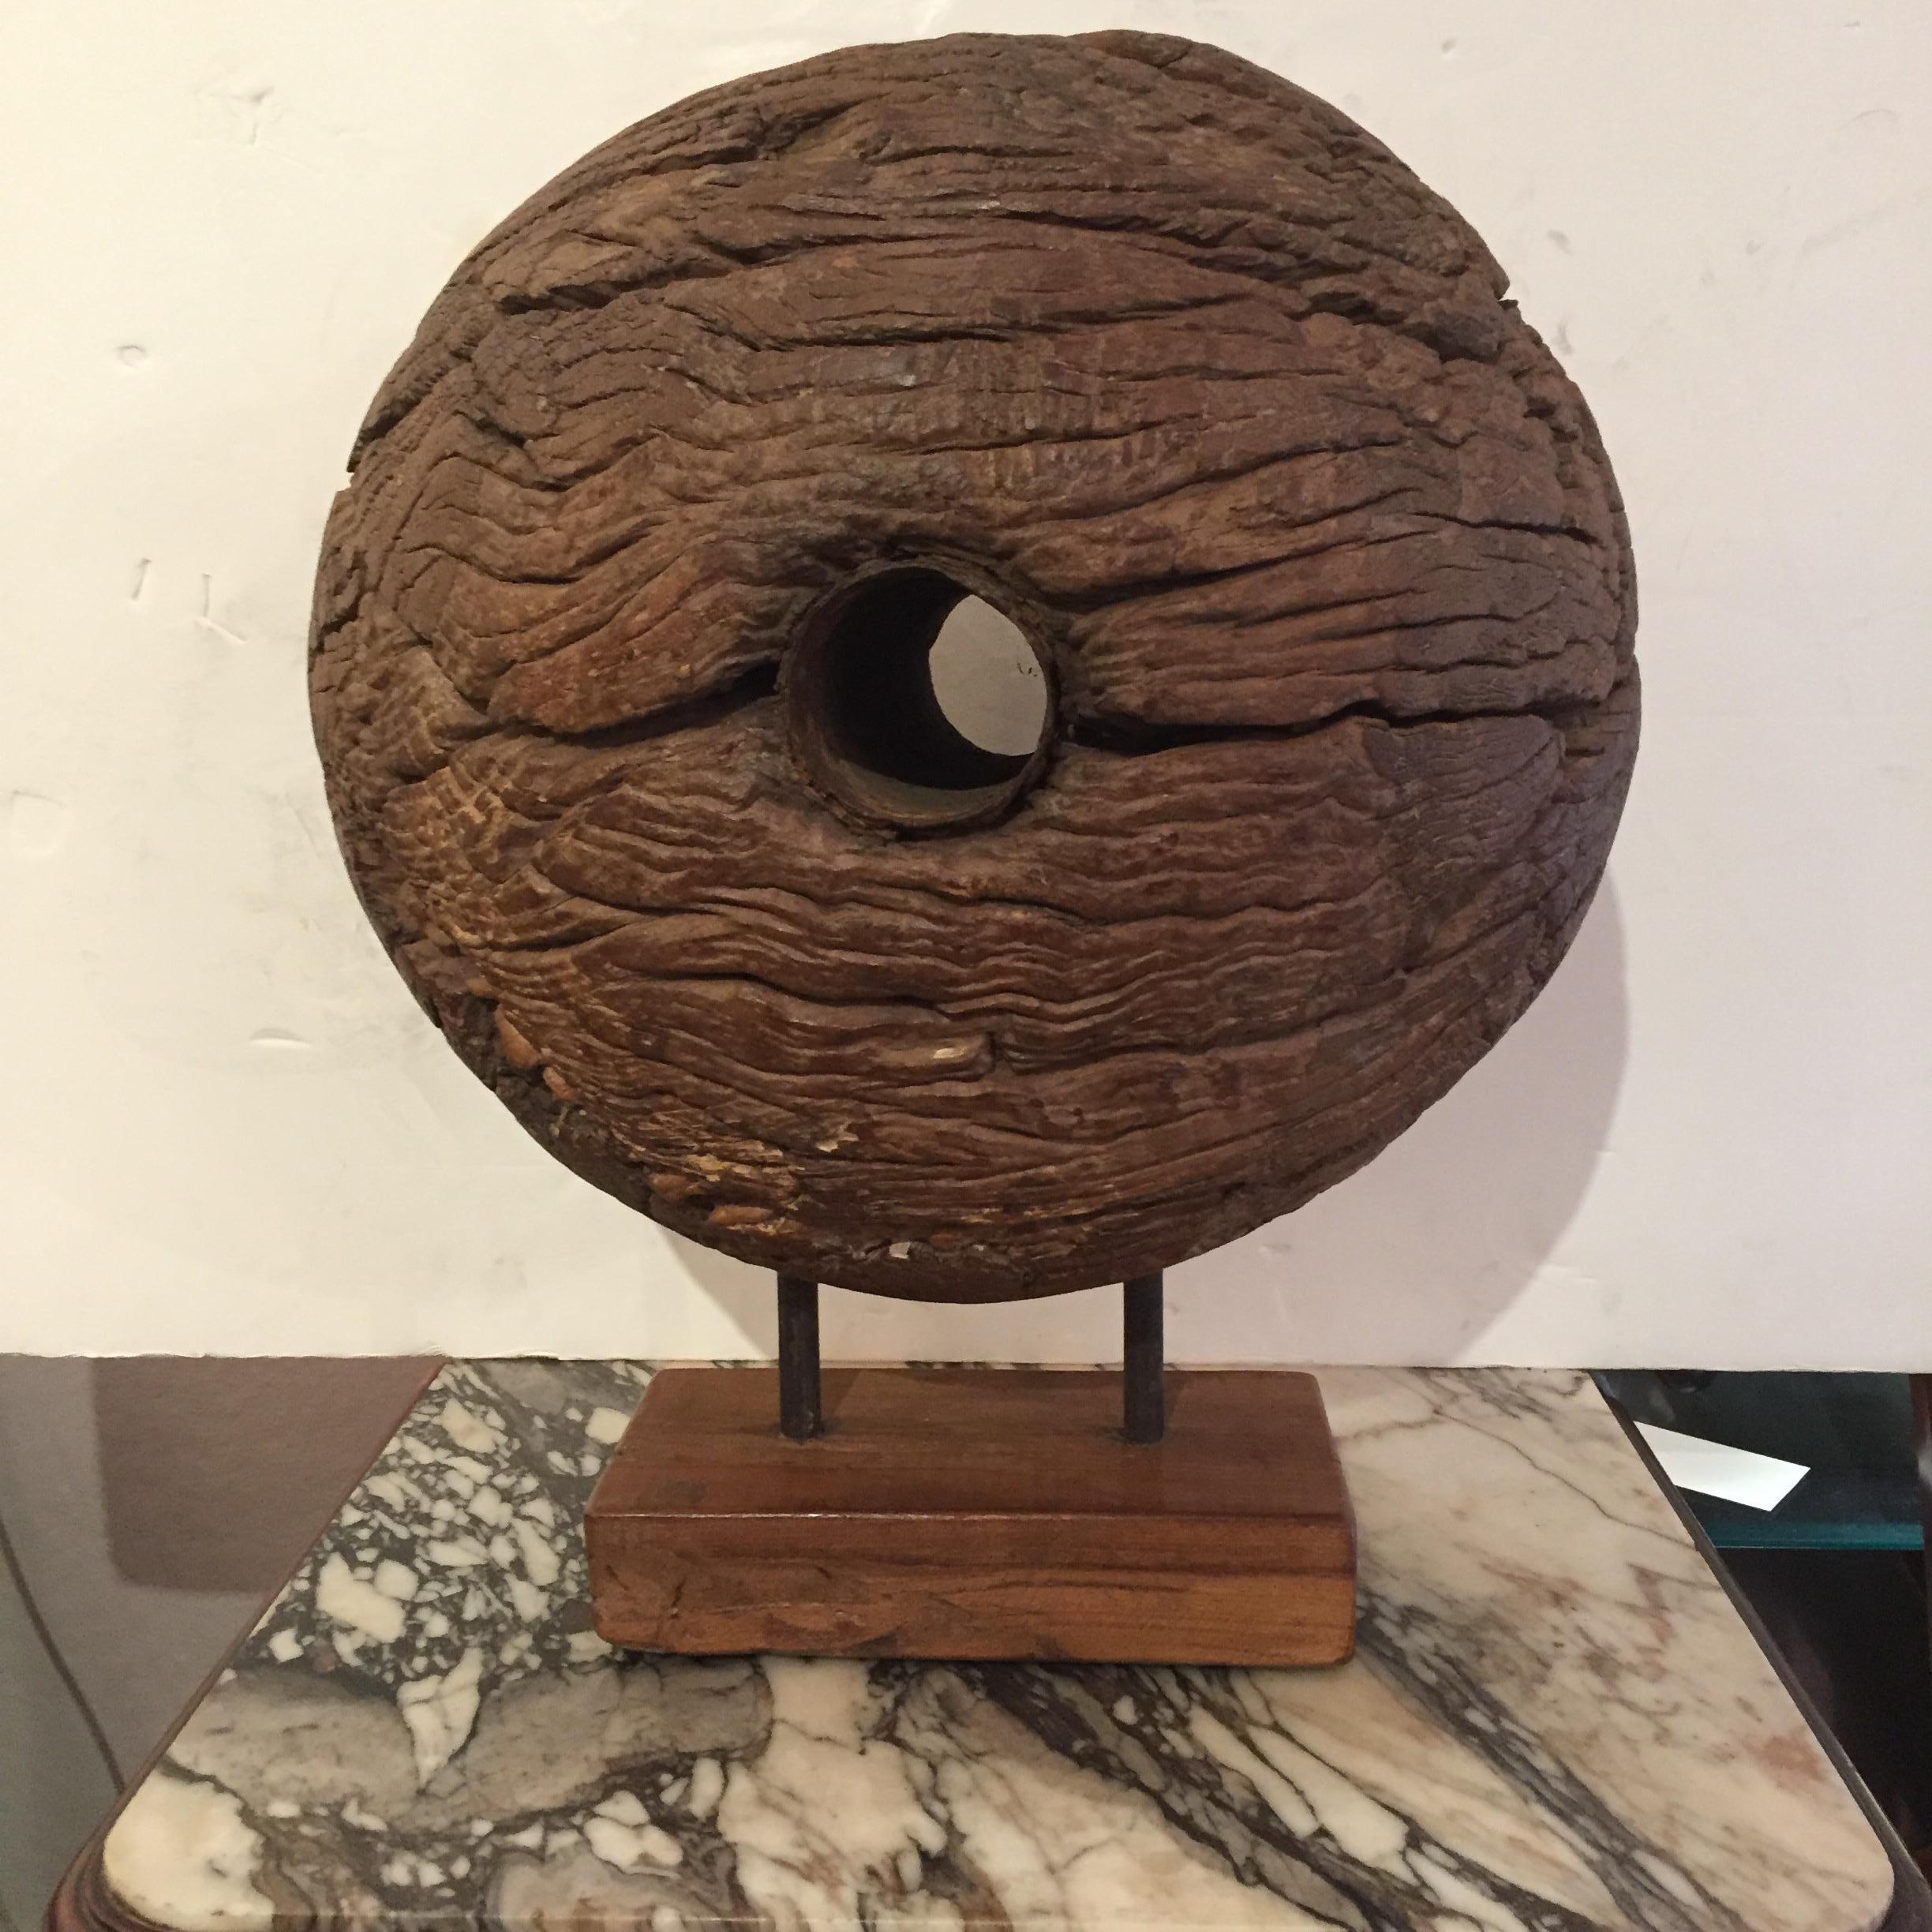 A fabulous mounted found object sculpture that's an impressively bold knotty and worn ship's pulley with simple modern black iron base.